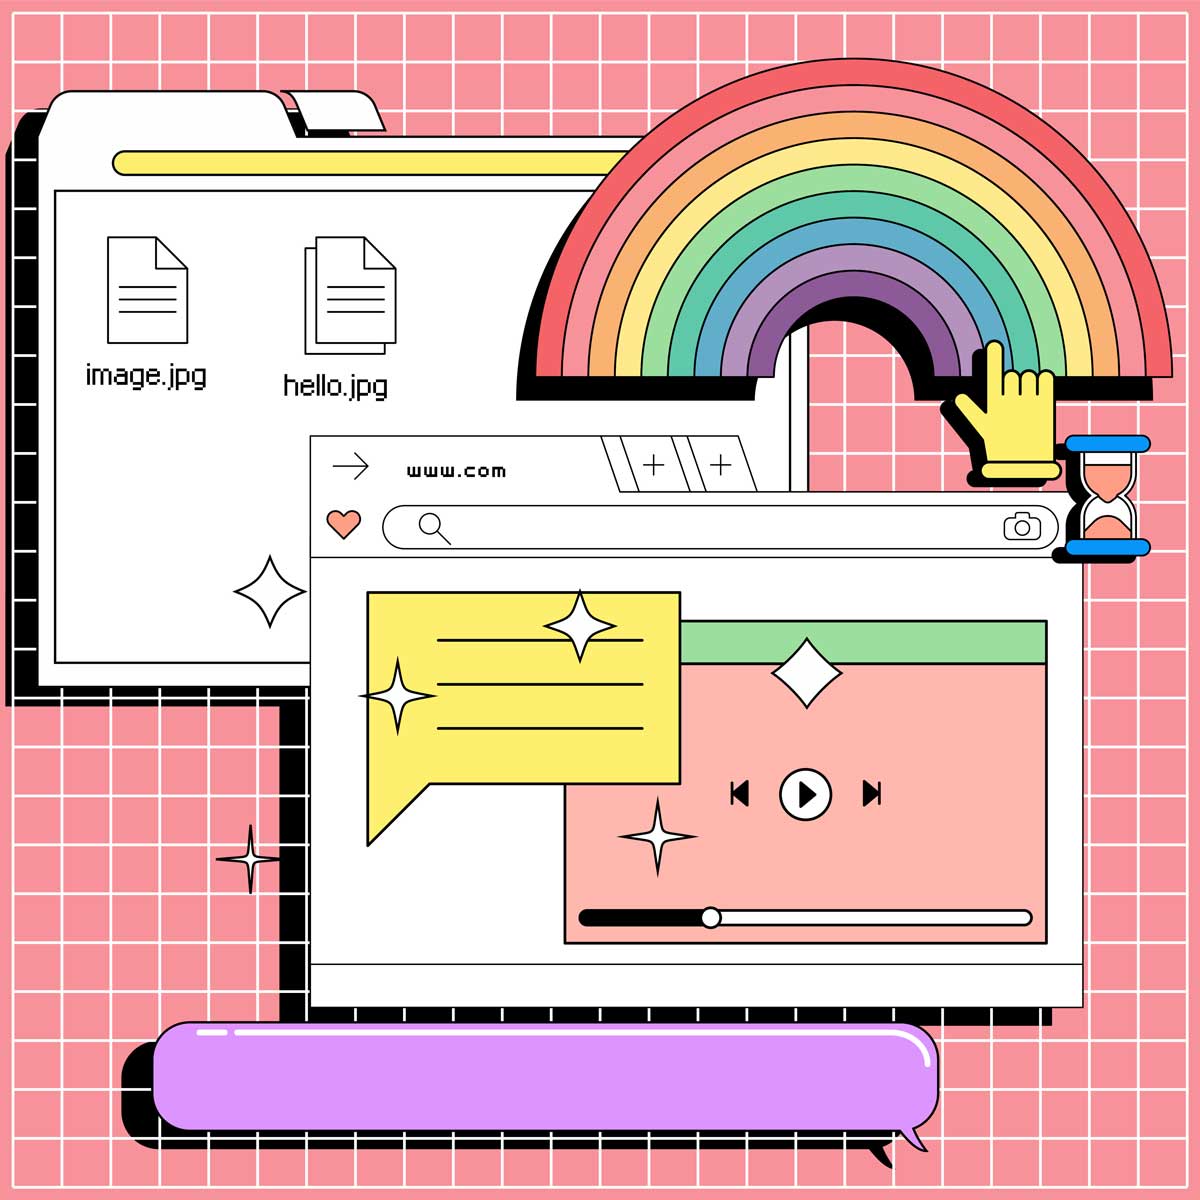 Collage of user interface elements and rainbow symbol, Vaporwave aesthetics of the 90s